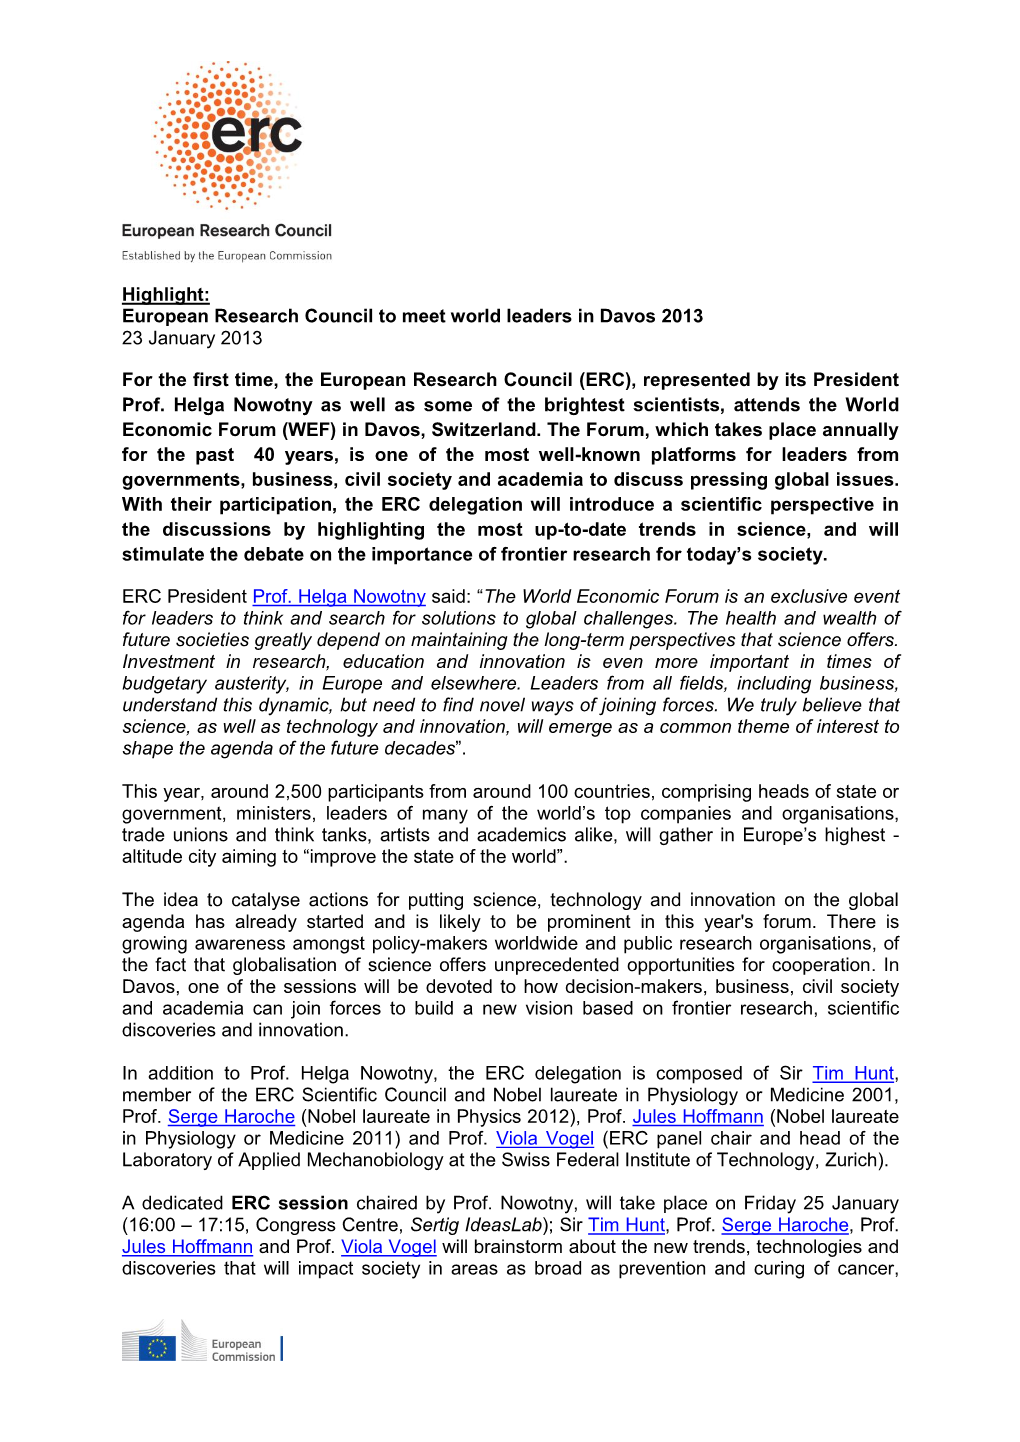 European Research Council to Meet World Leaders in Davos 2013 23 January 2013